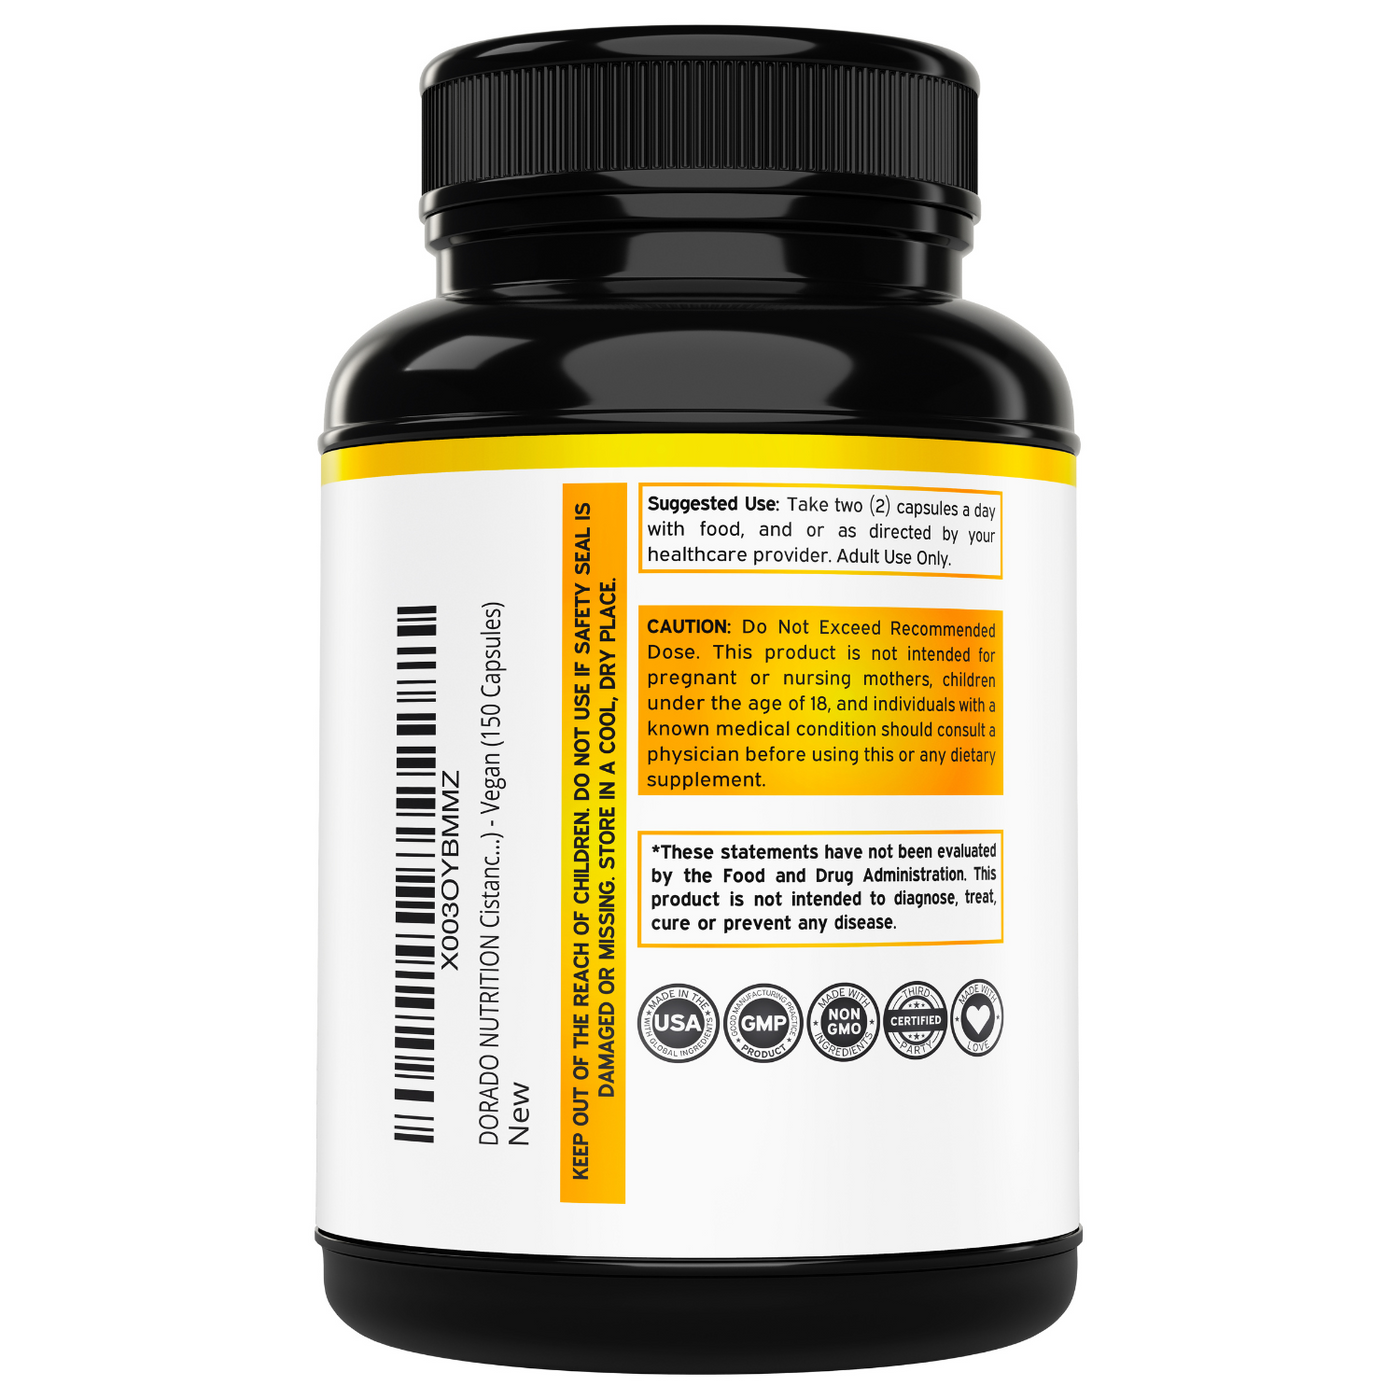 Cistanche Tubulosa Extract 400mg Per Serving (50% Echinacoside + 10% Acetoside)